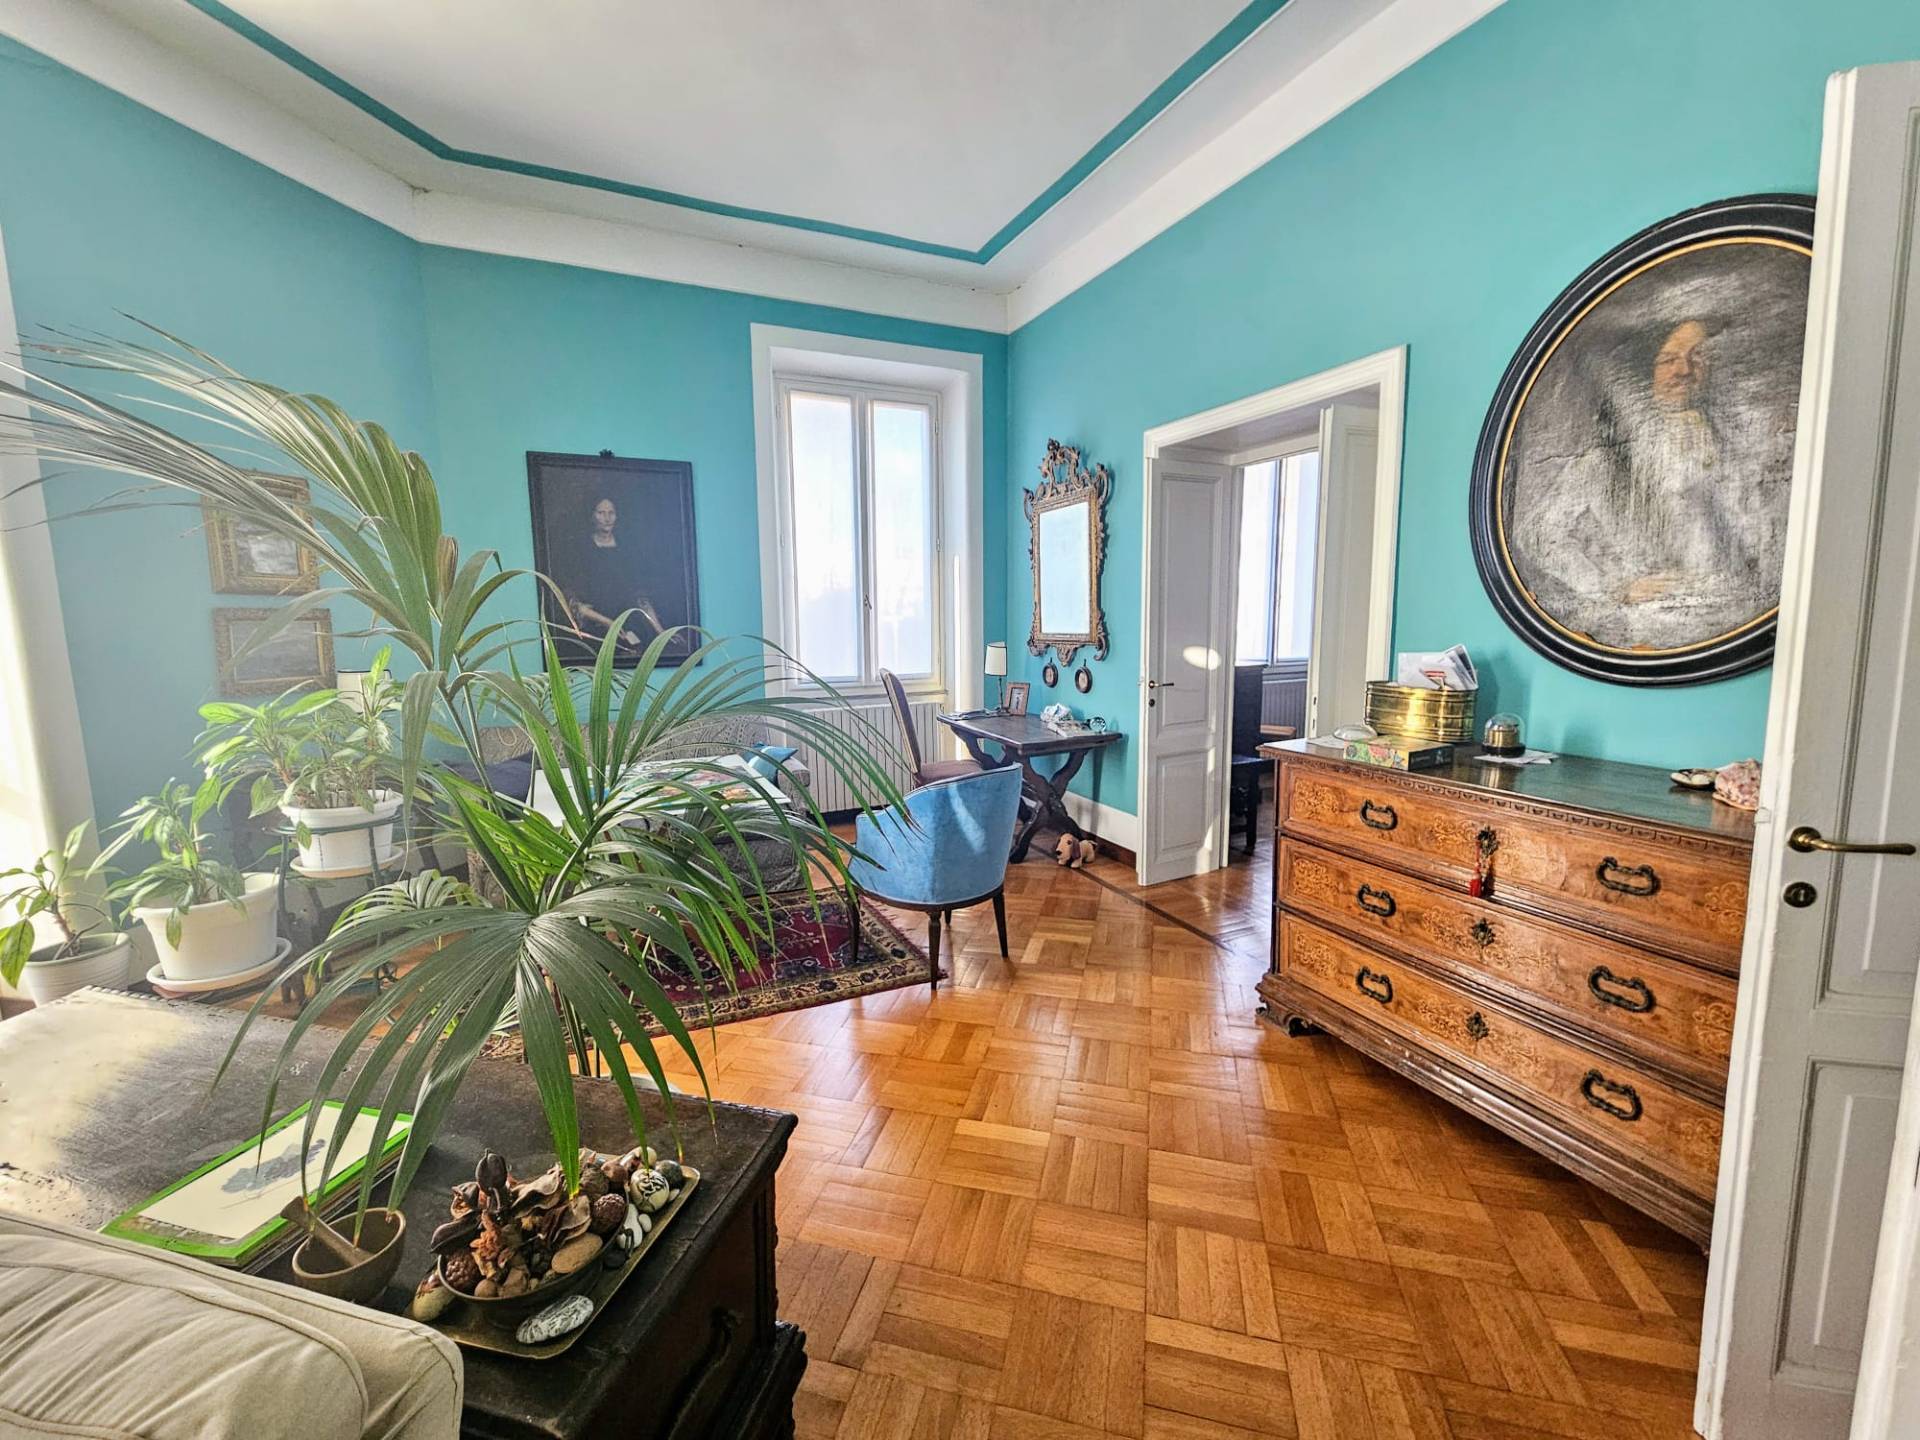 Piazzale Clodio, Roma, Roma, 00100, IT, 4 Bedrooms Bedrooms, ,3 BathroomsBathrooms,Residential,For Sale,Piazzale Clodio,1454669